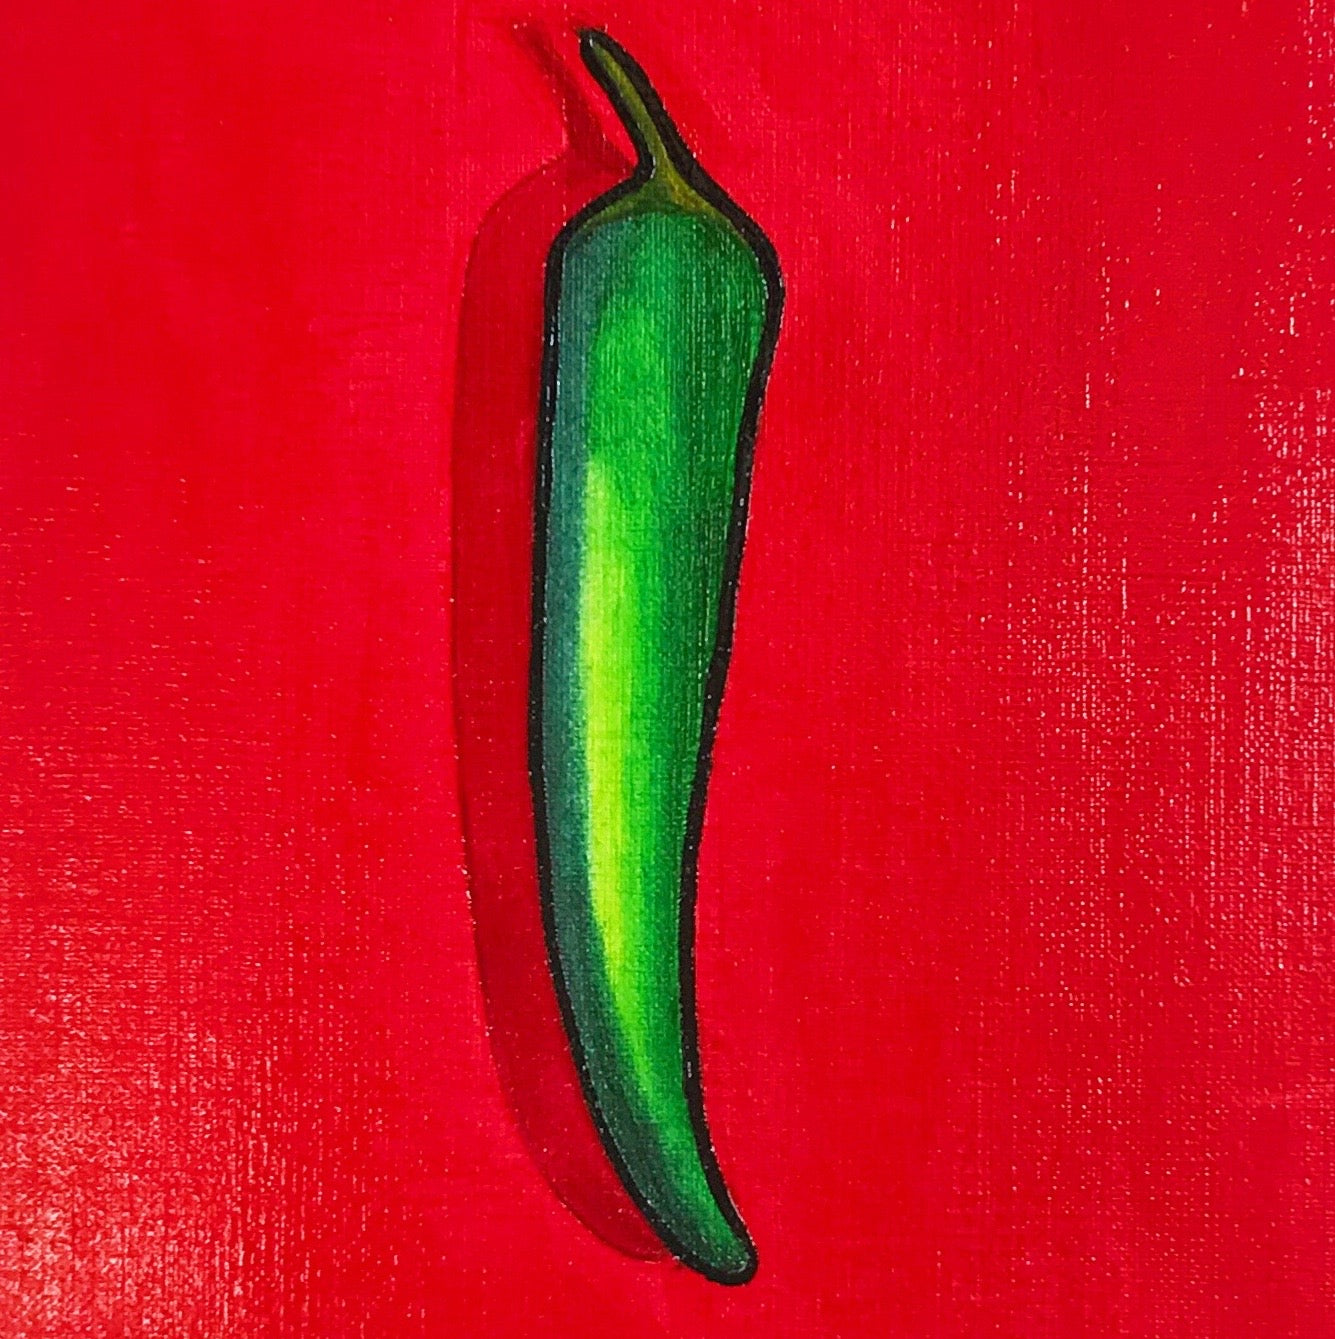 A happy art painting of a green chili on a red background